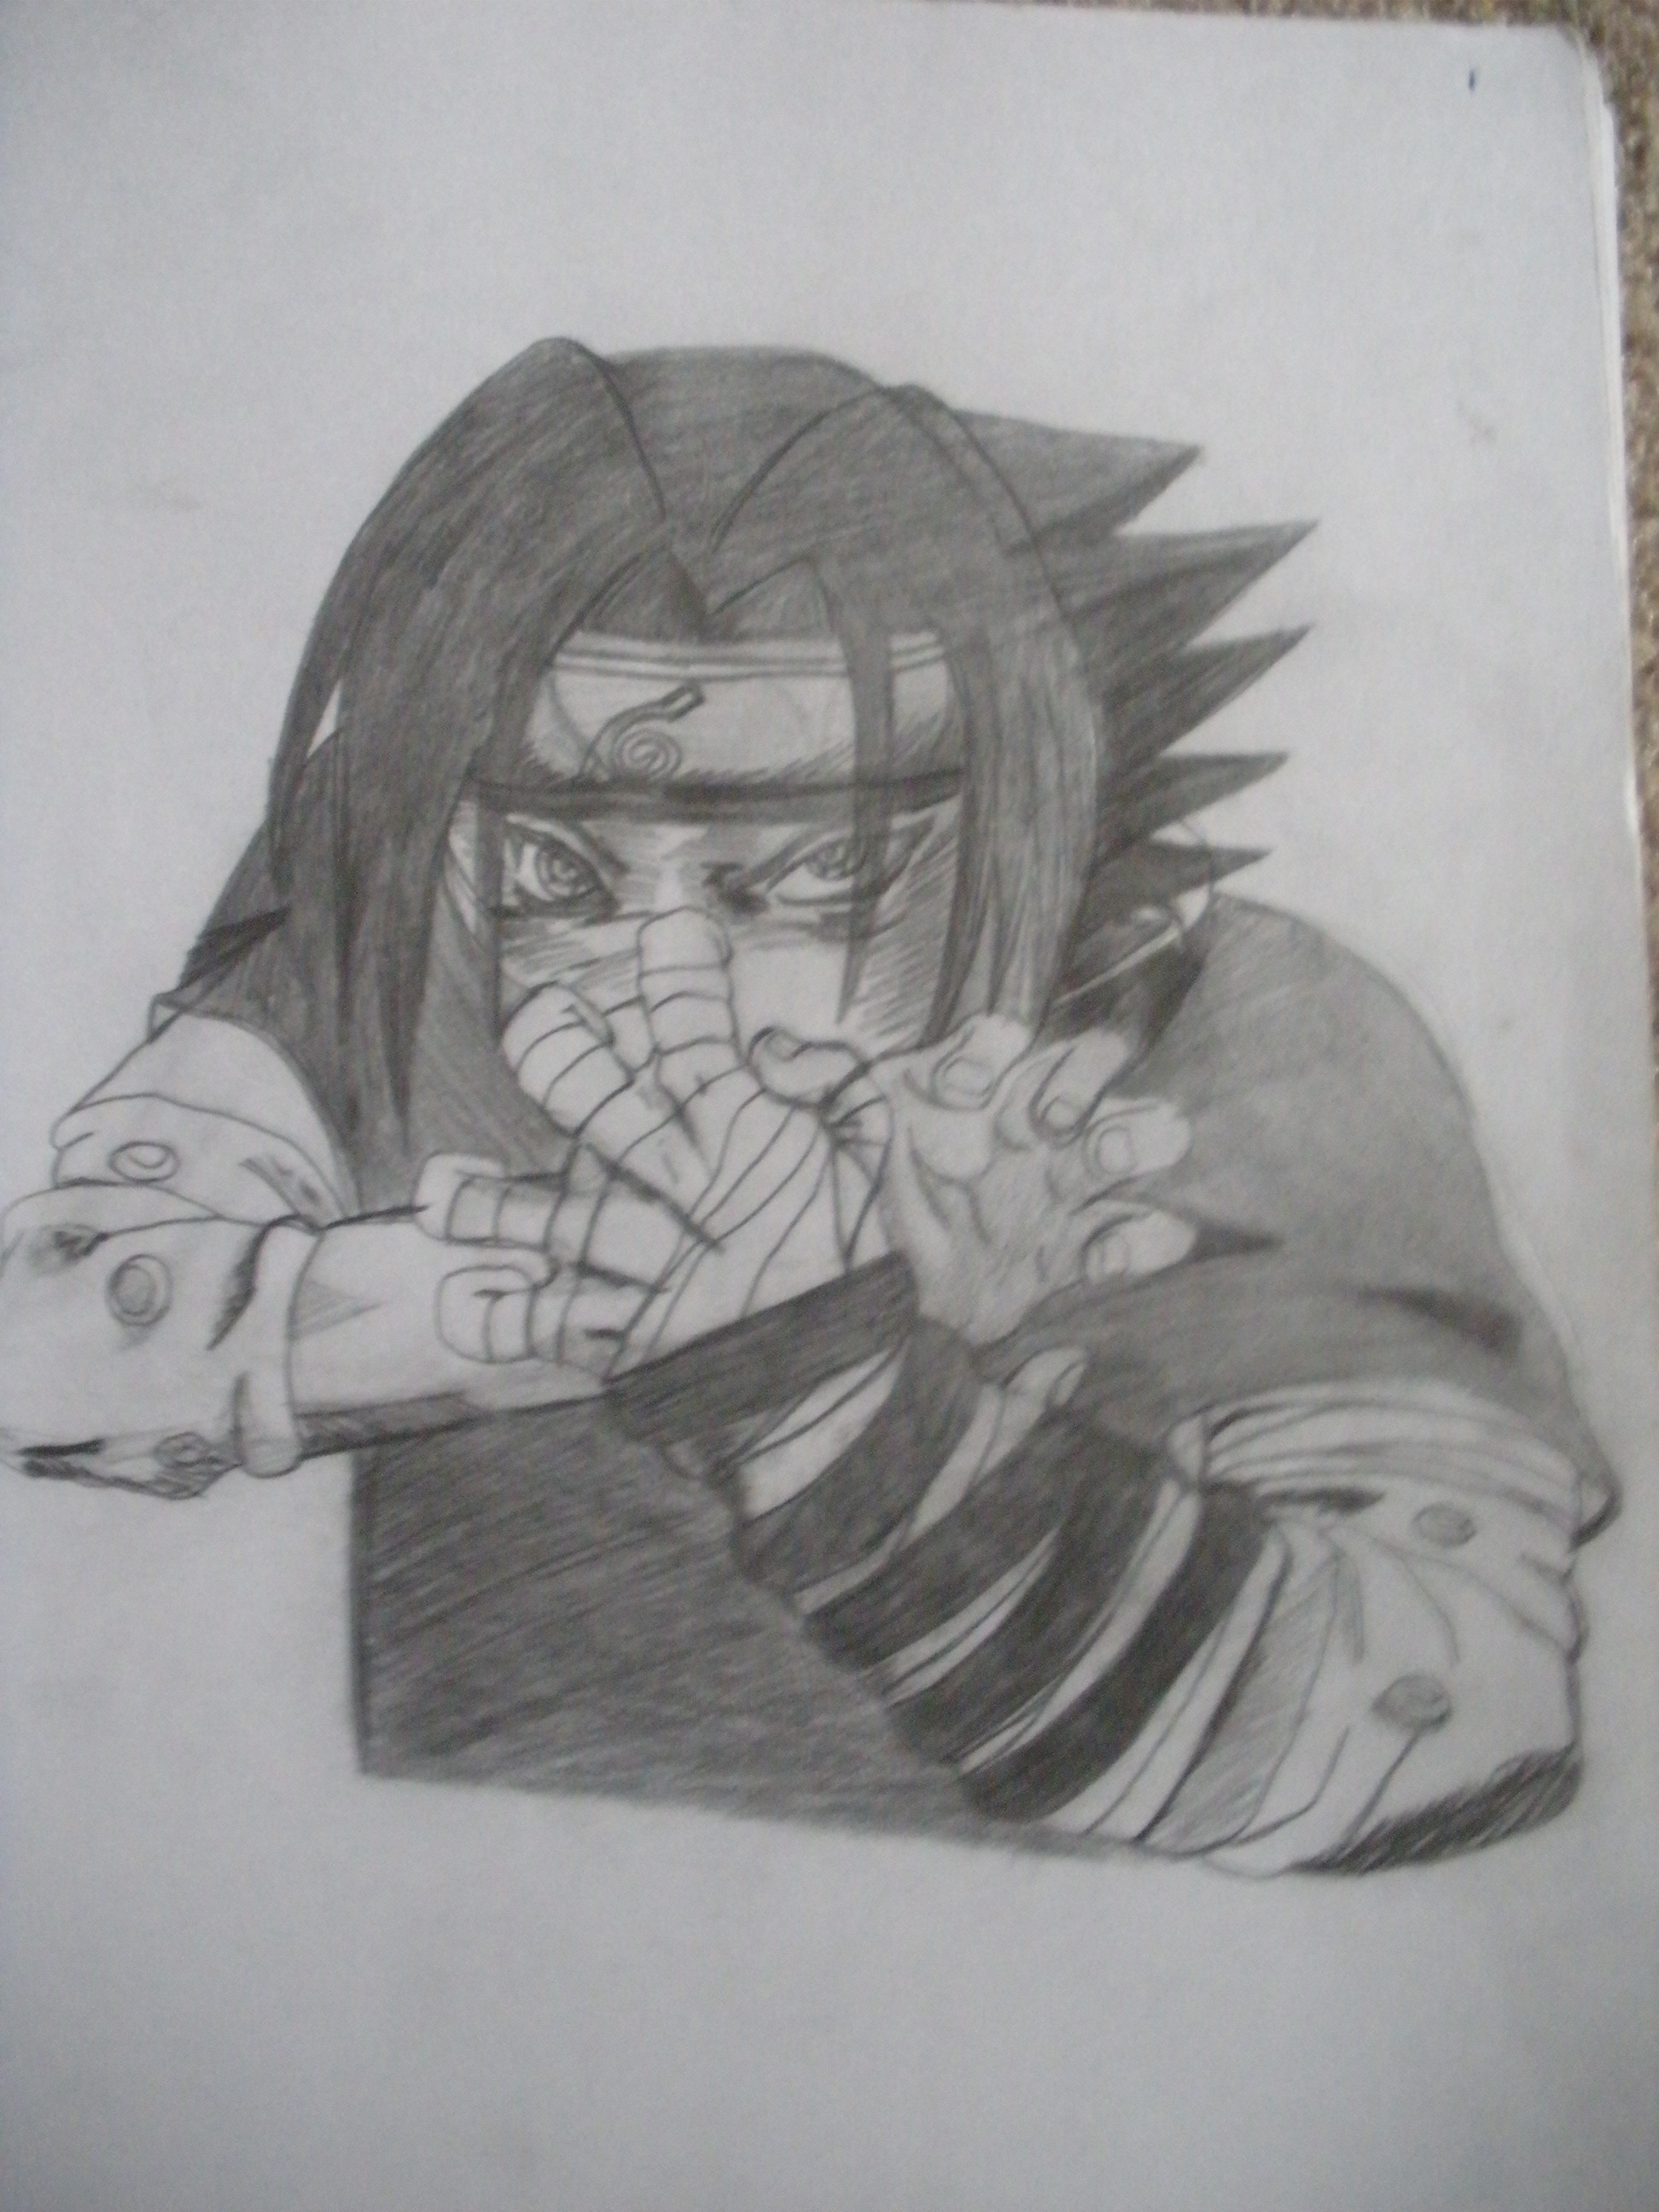 Chidori outline by superjacqui on DeviantArt